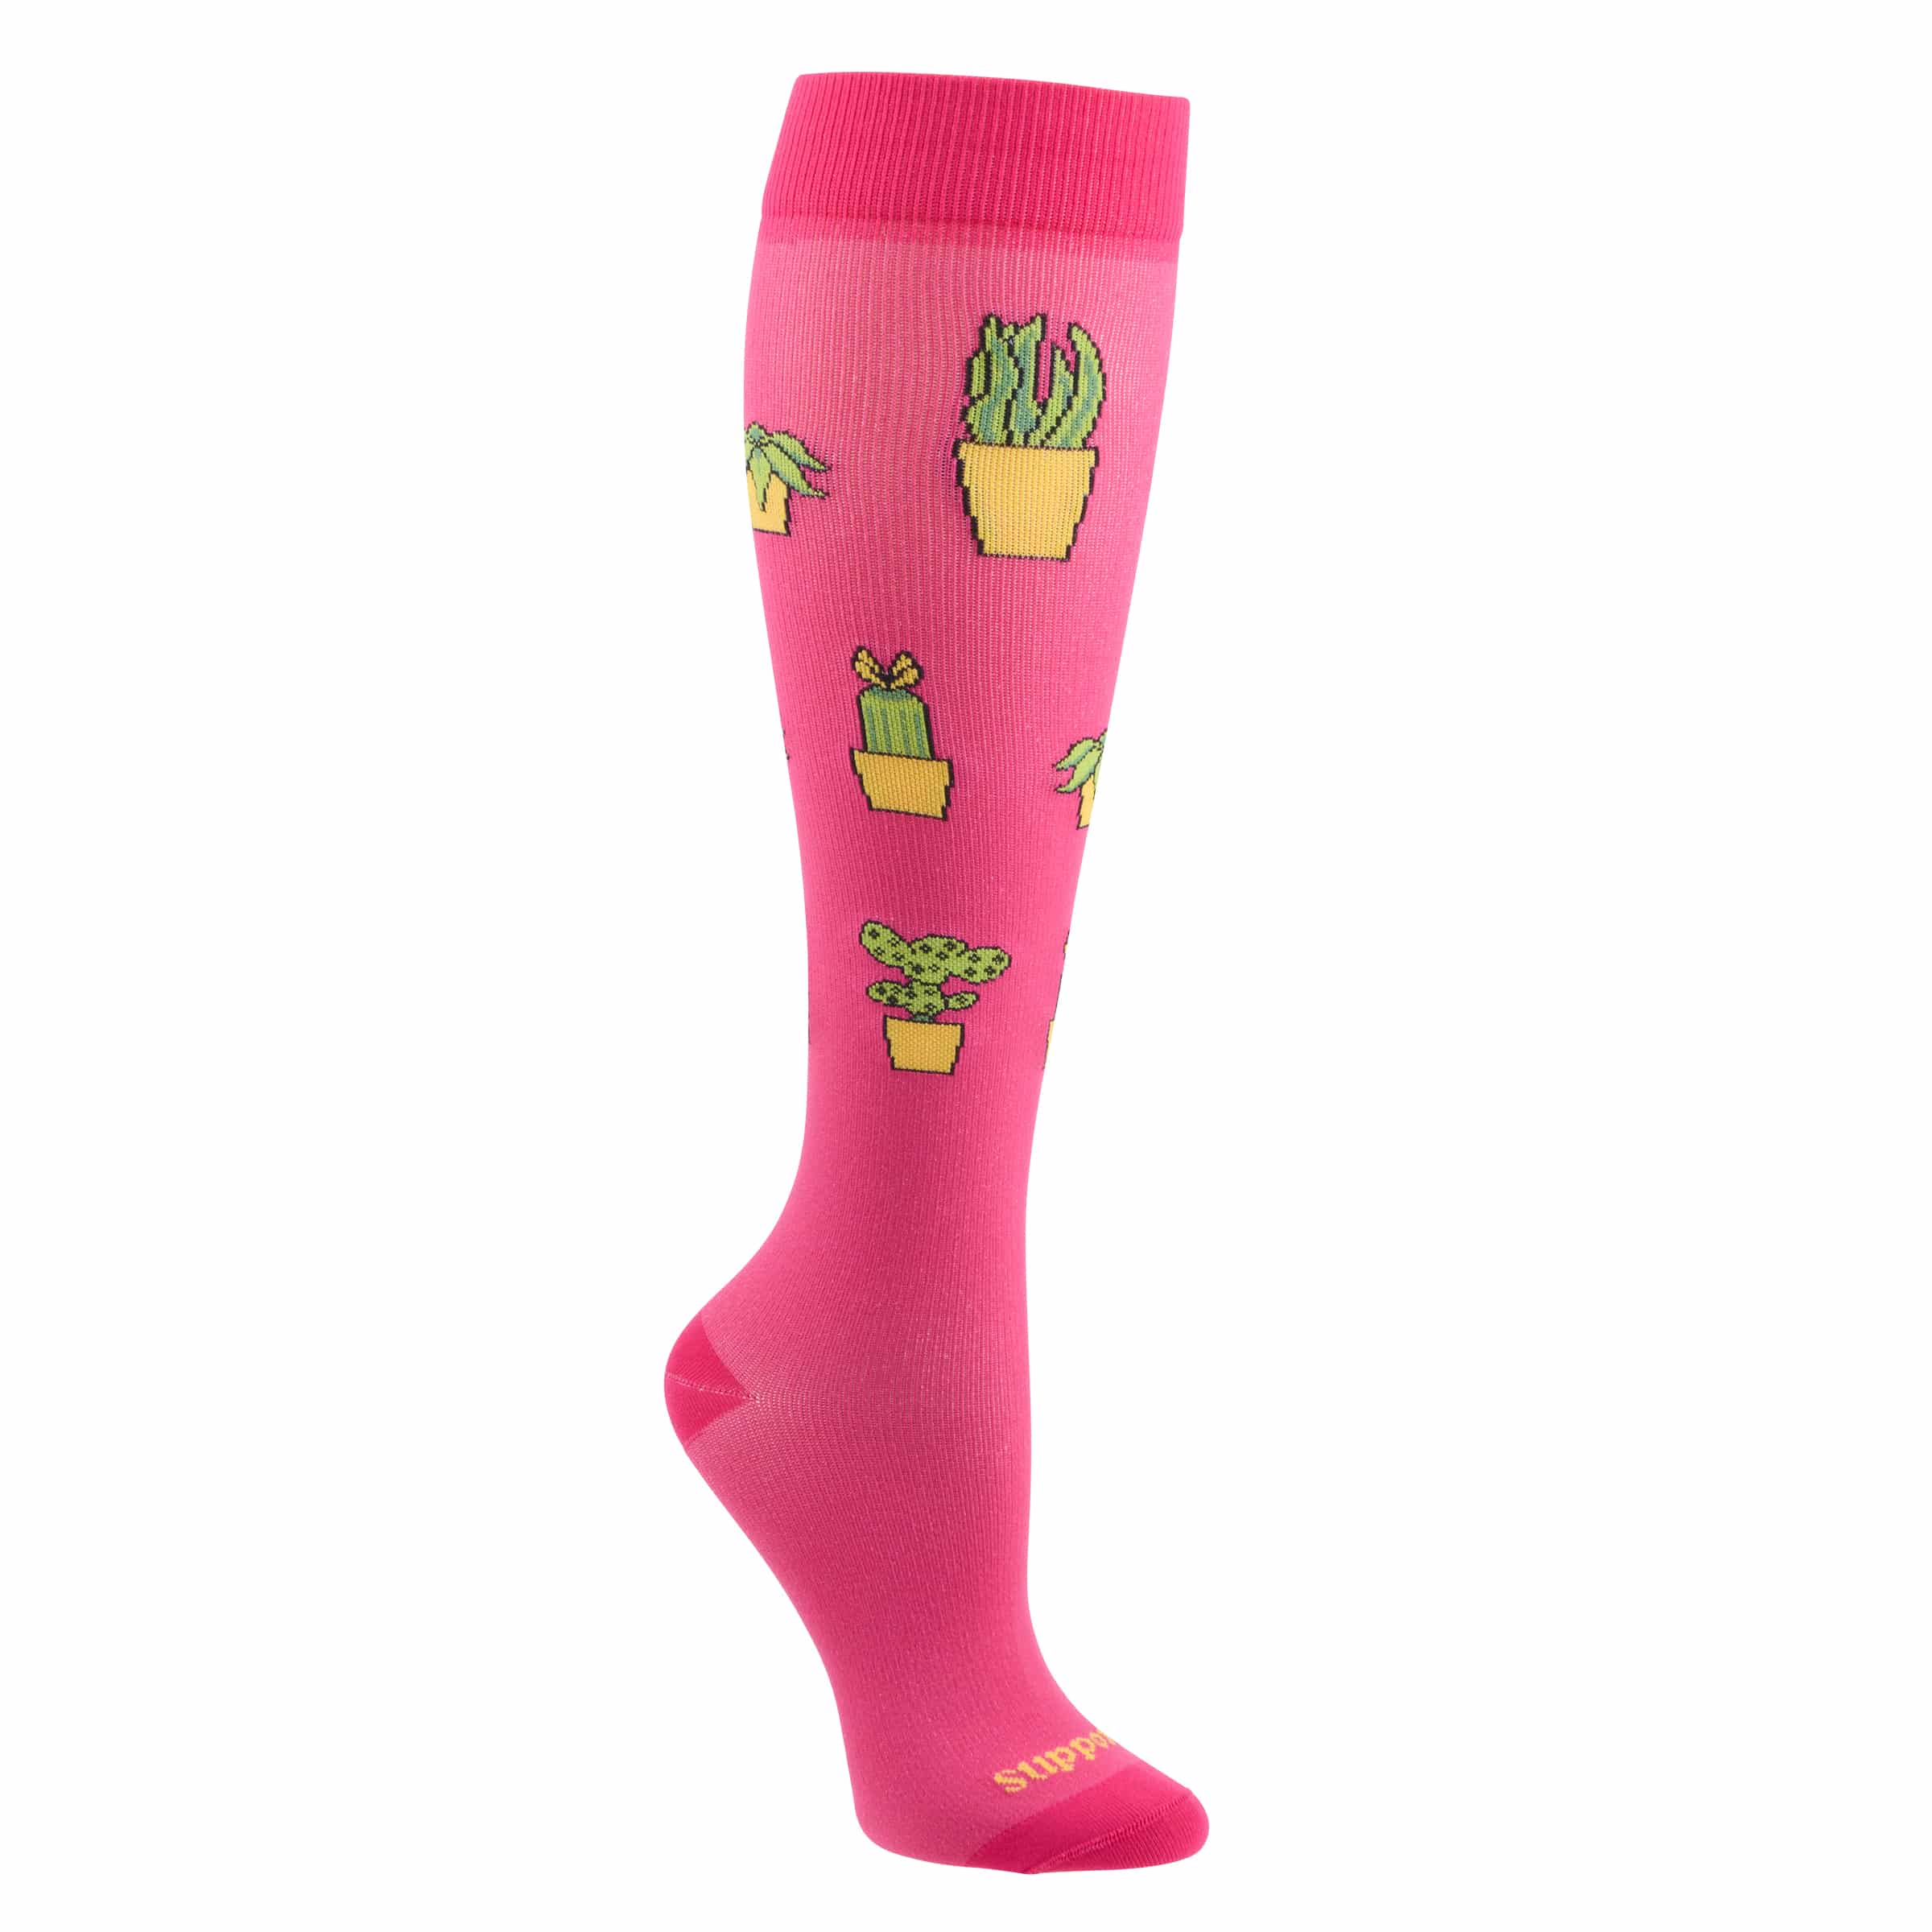 Supporo Unisex House Plants Compression Socks